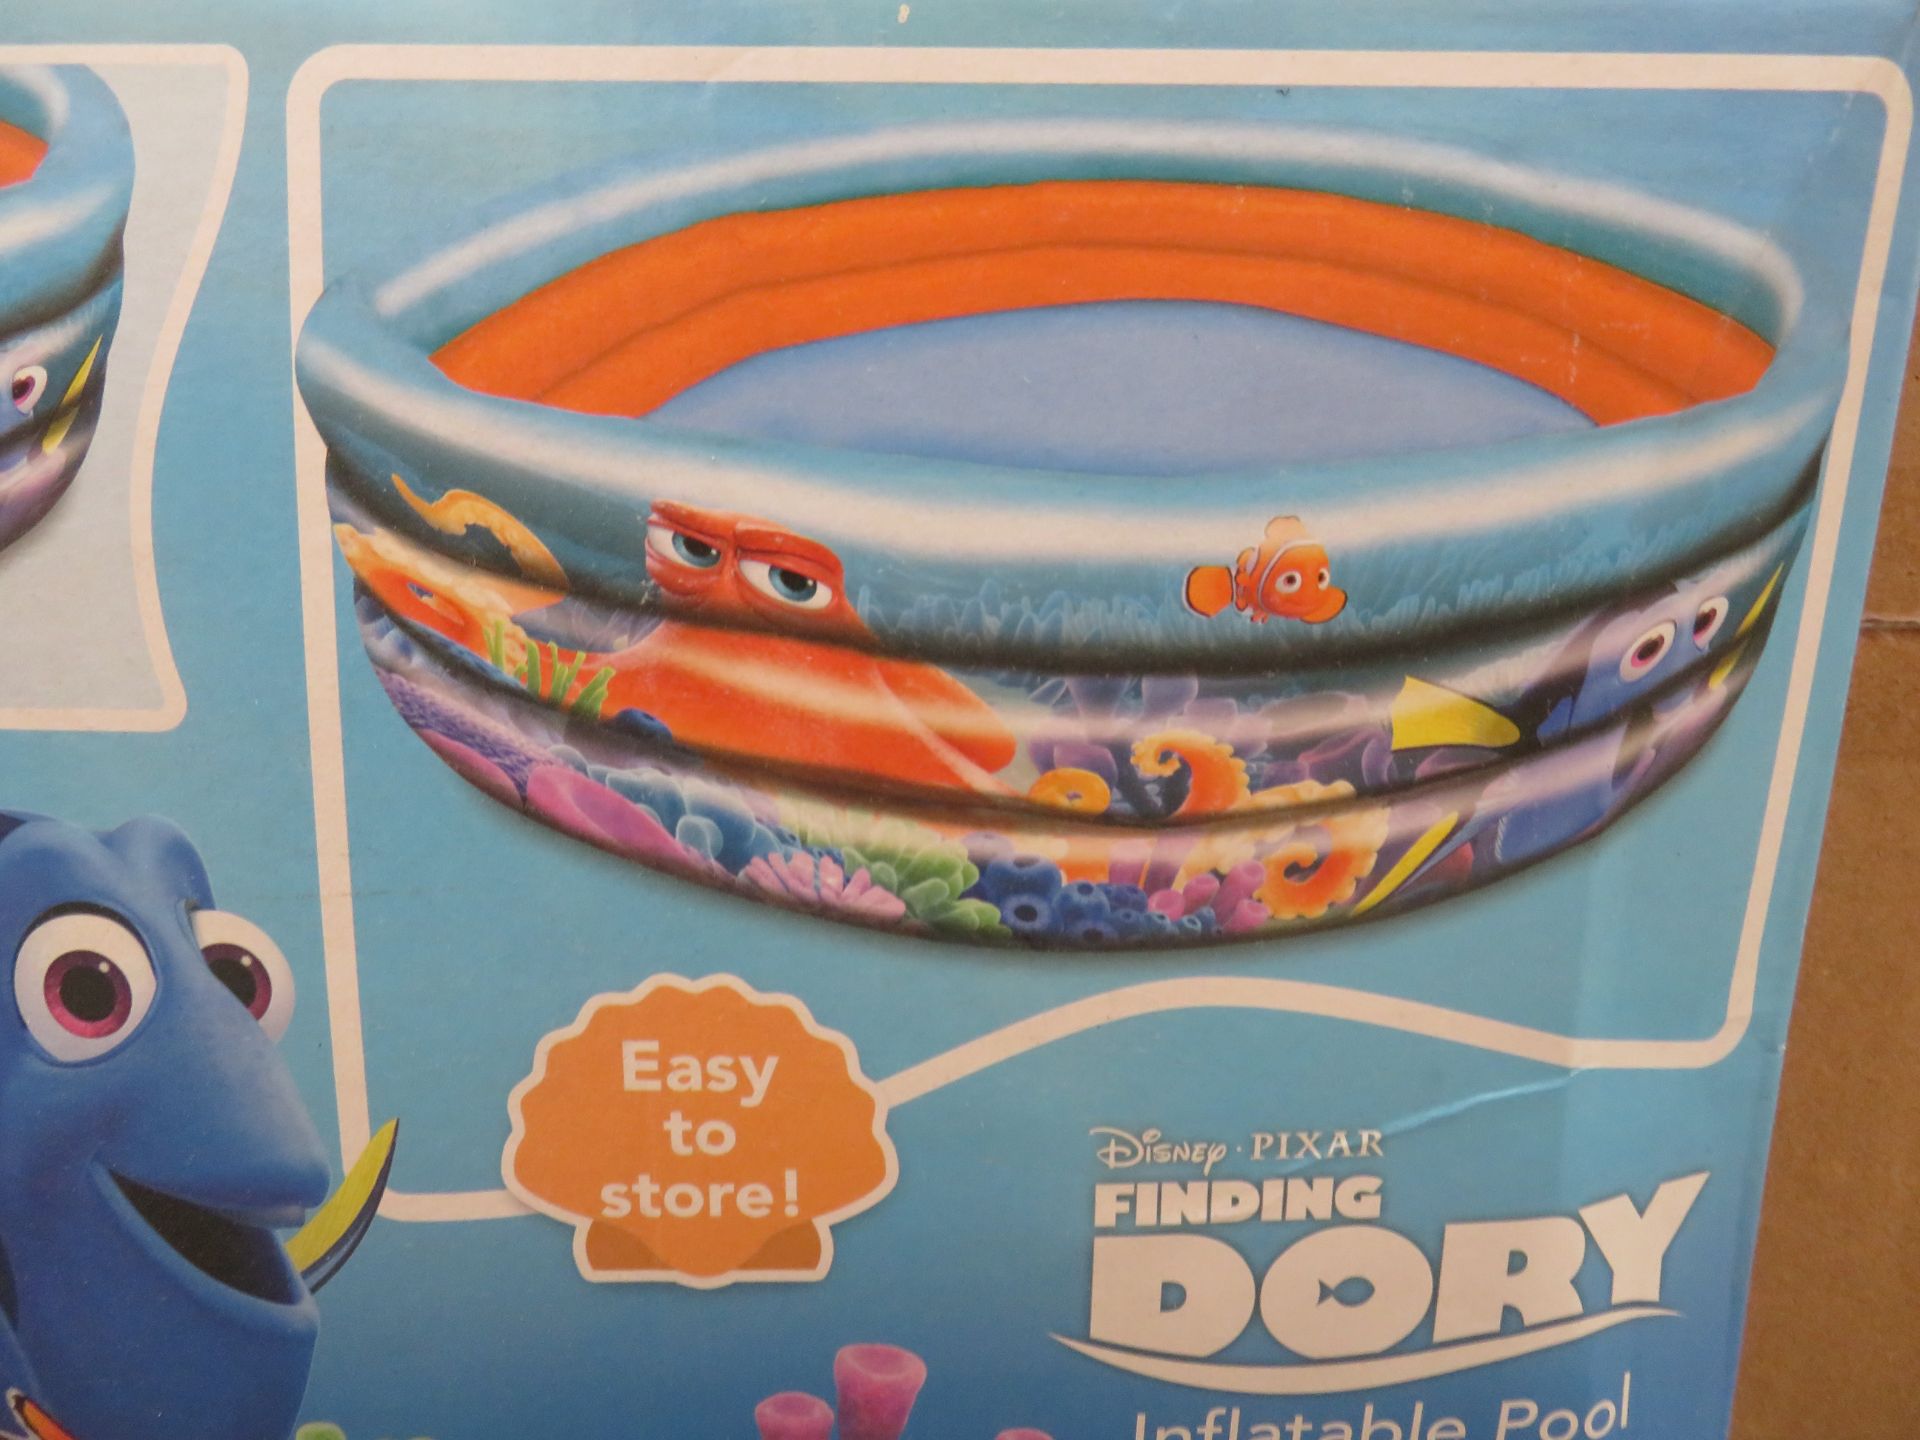 PALLET TO CONTAIN 120 x BRAND NEW DISNEY FINDING DORY INFLATABLE POOLS. EASY TO STORE. RRP £20 EACH, - Image 2 of 2